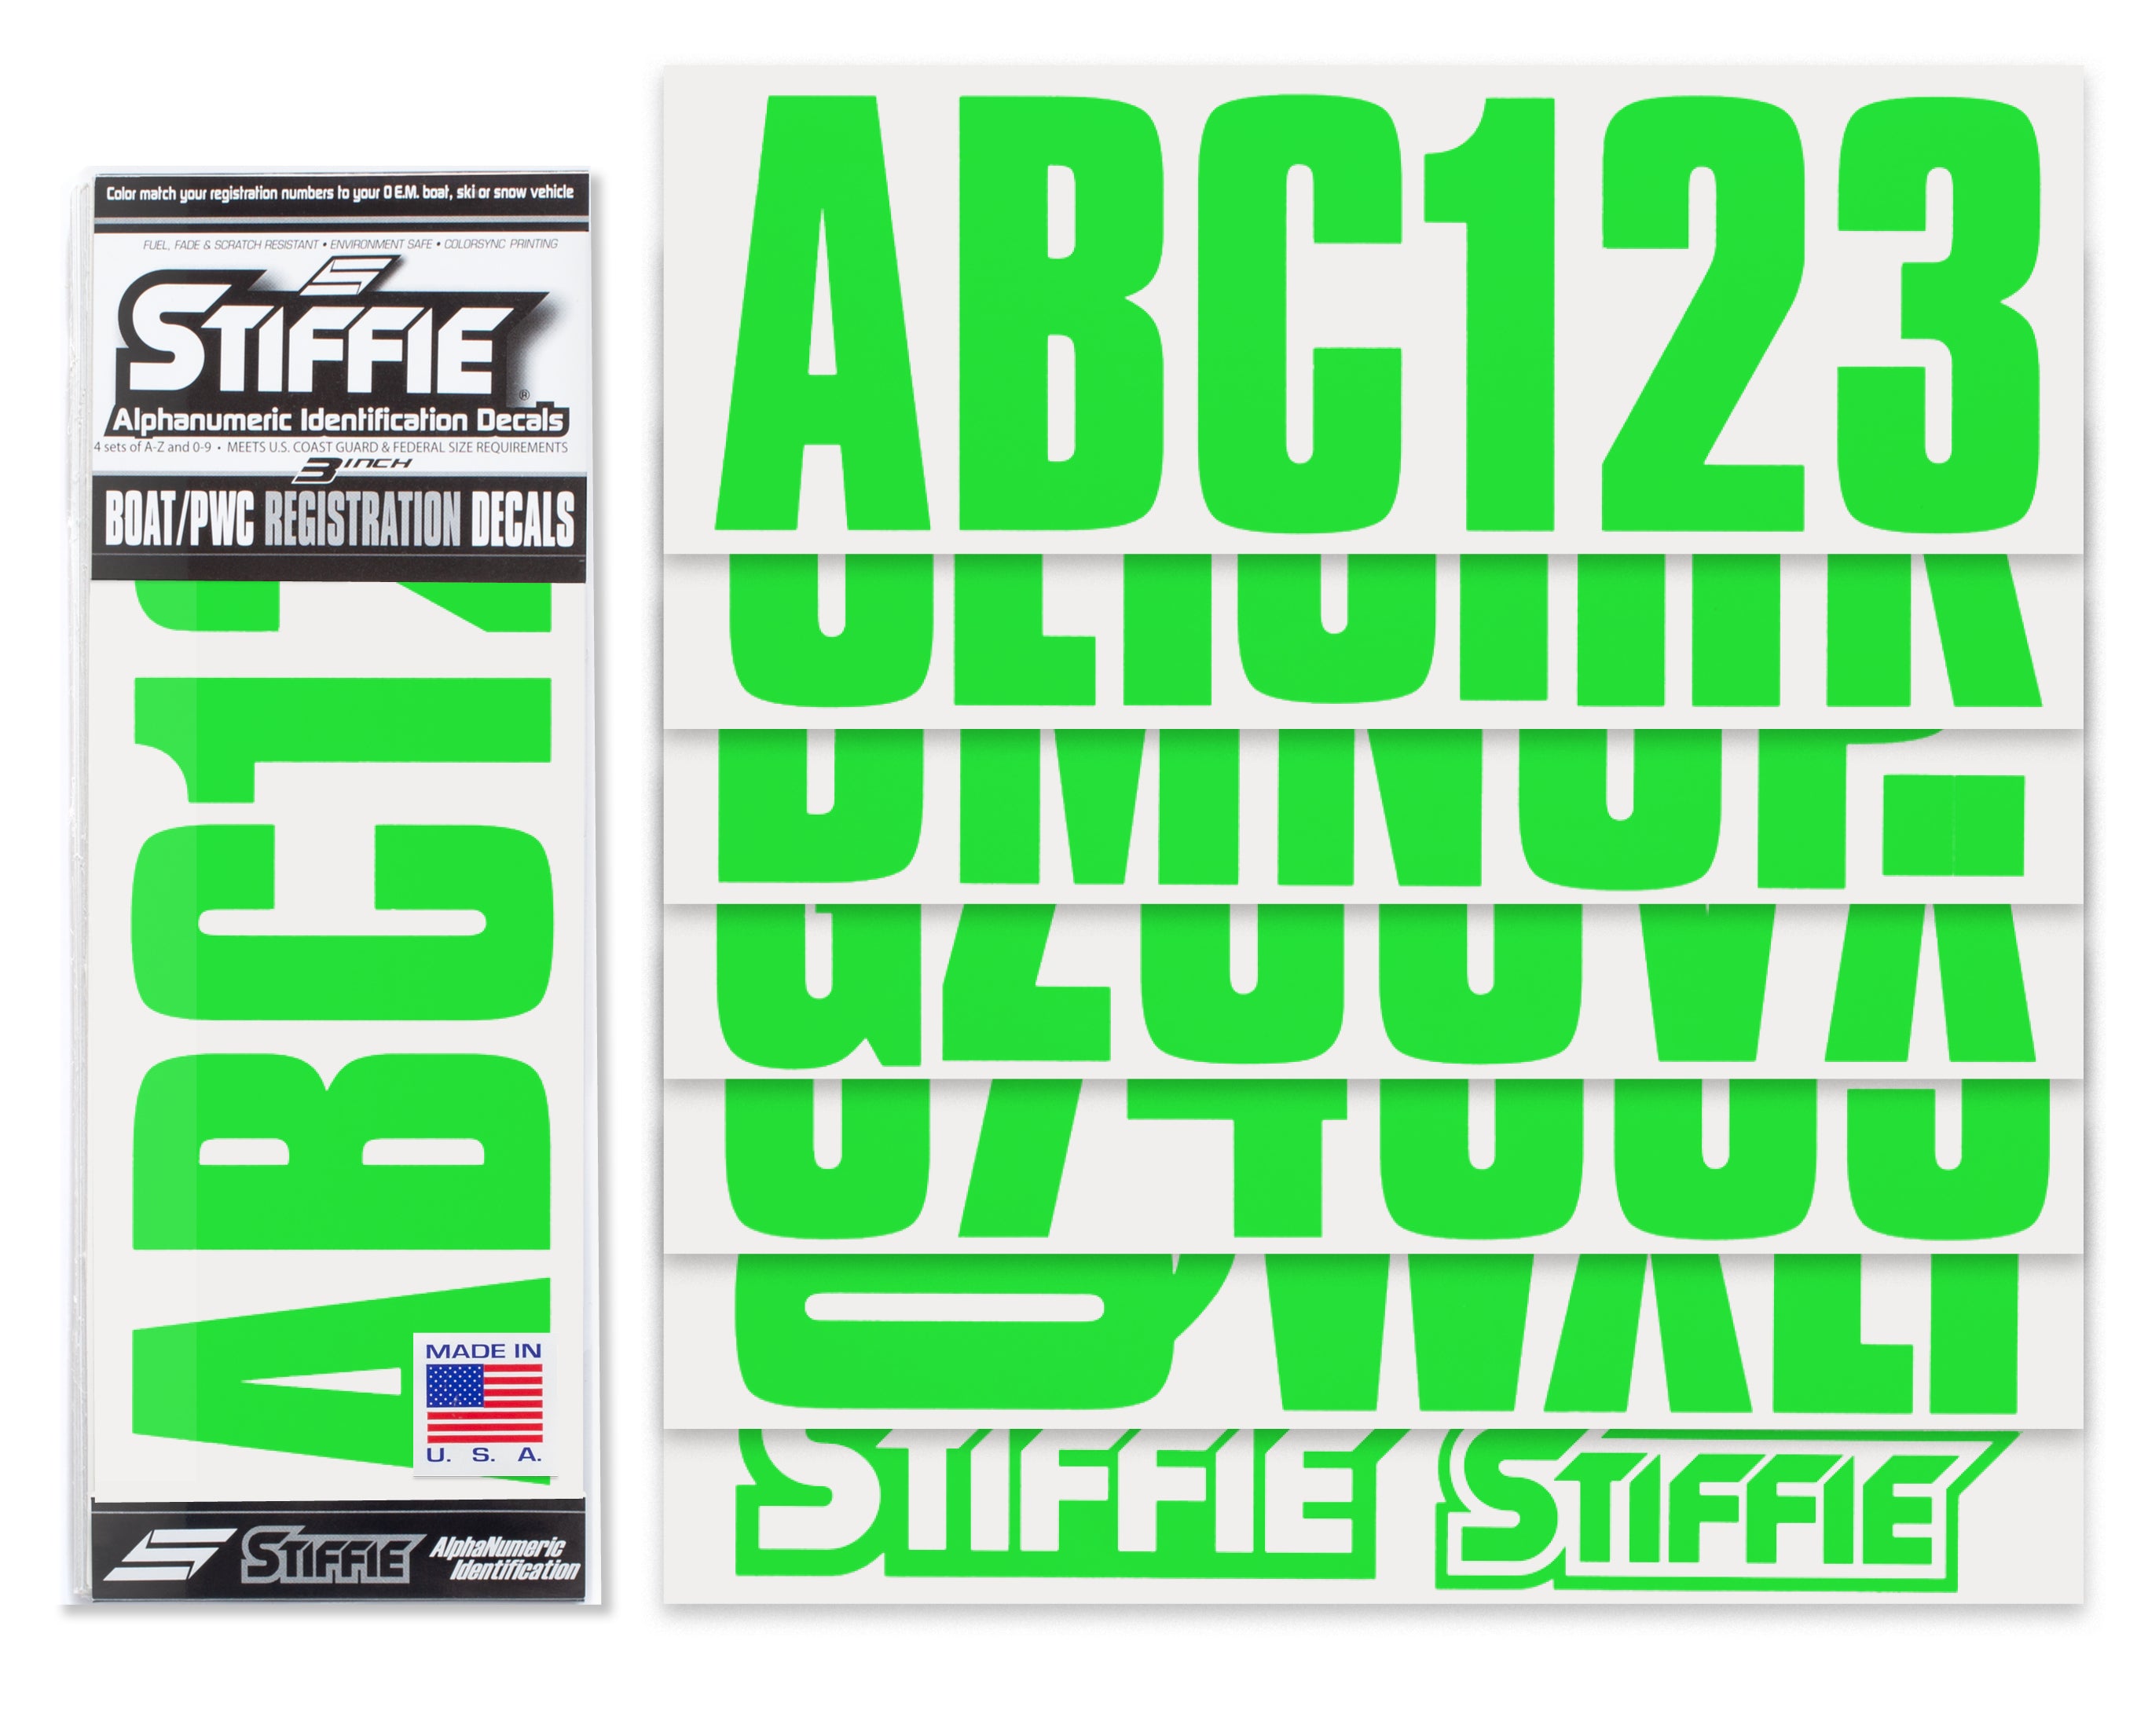 STIFFIE Uniline Electric Green 3" ID Kit Alpha-Numeric Registration Identification Numbers Stickers Decals for Boats & Personal Watercraft